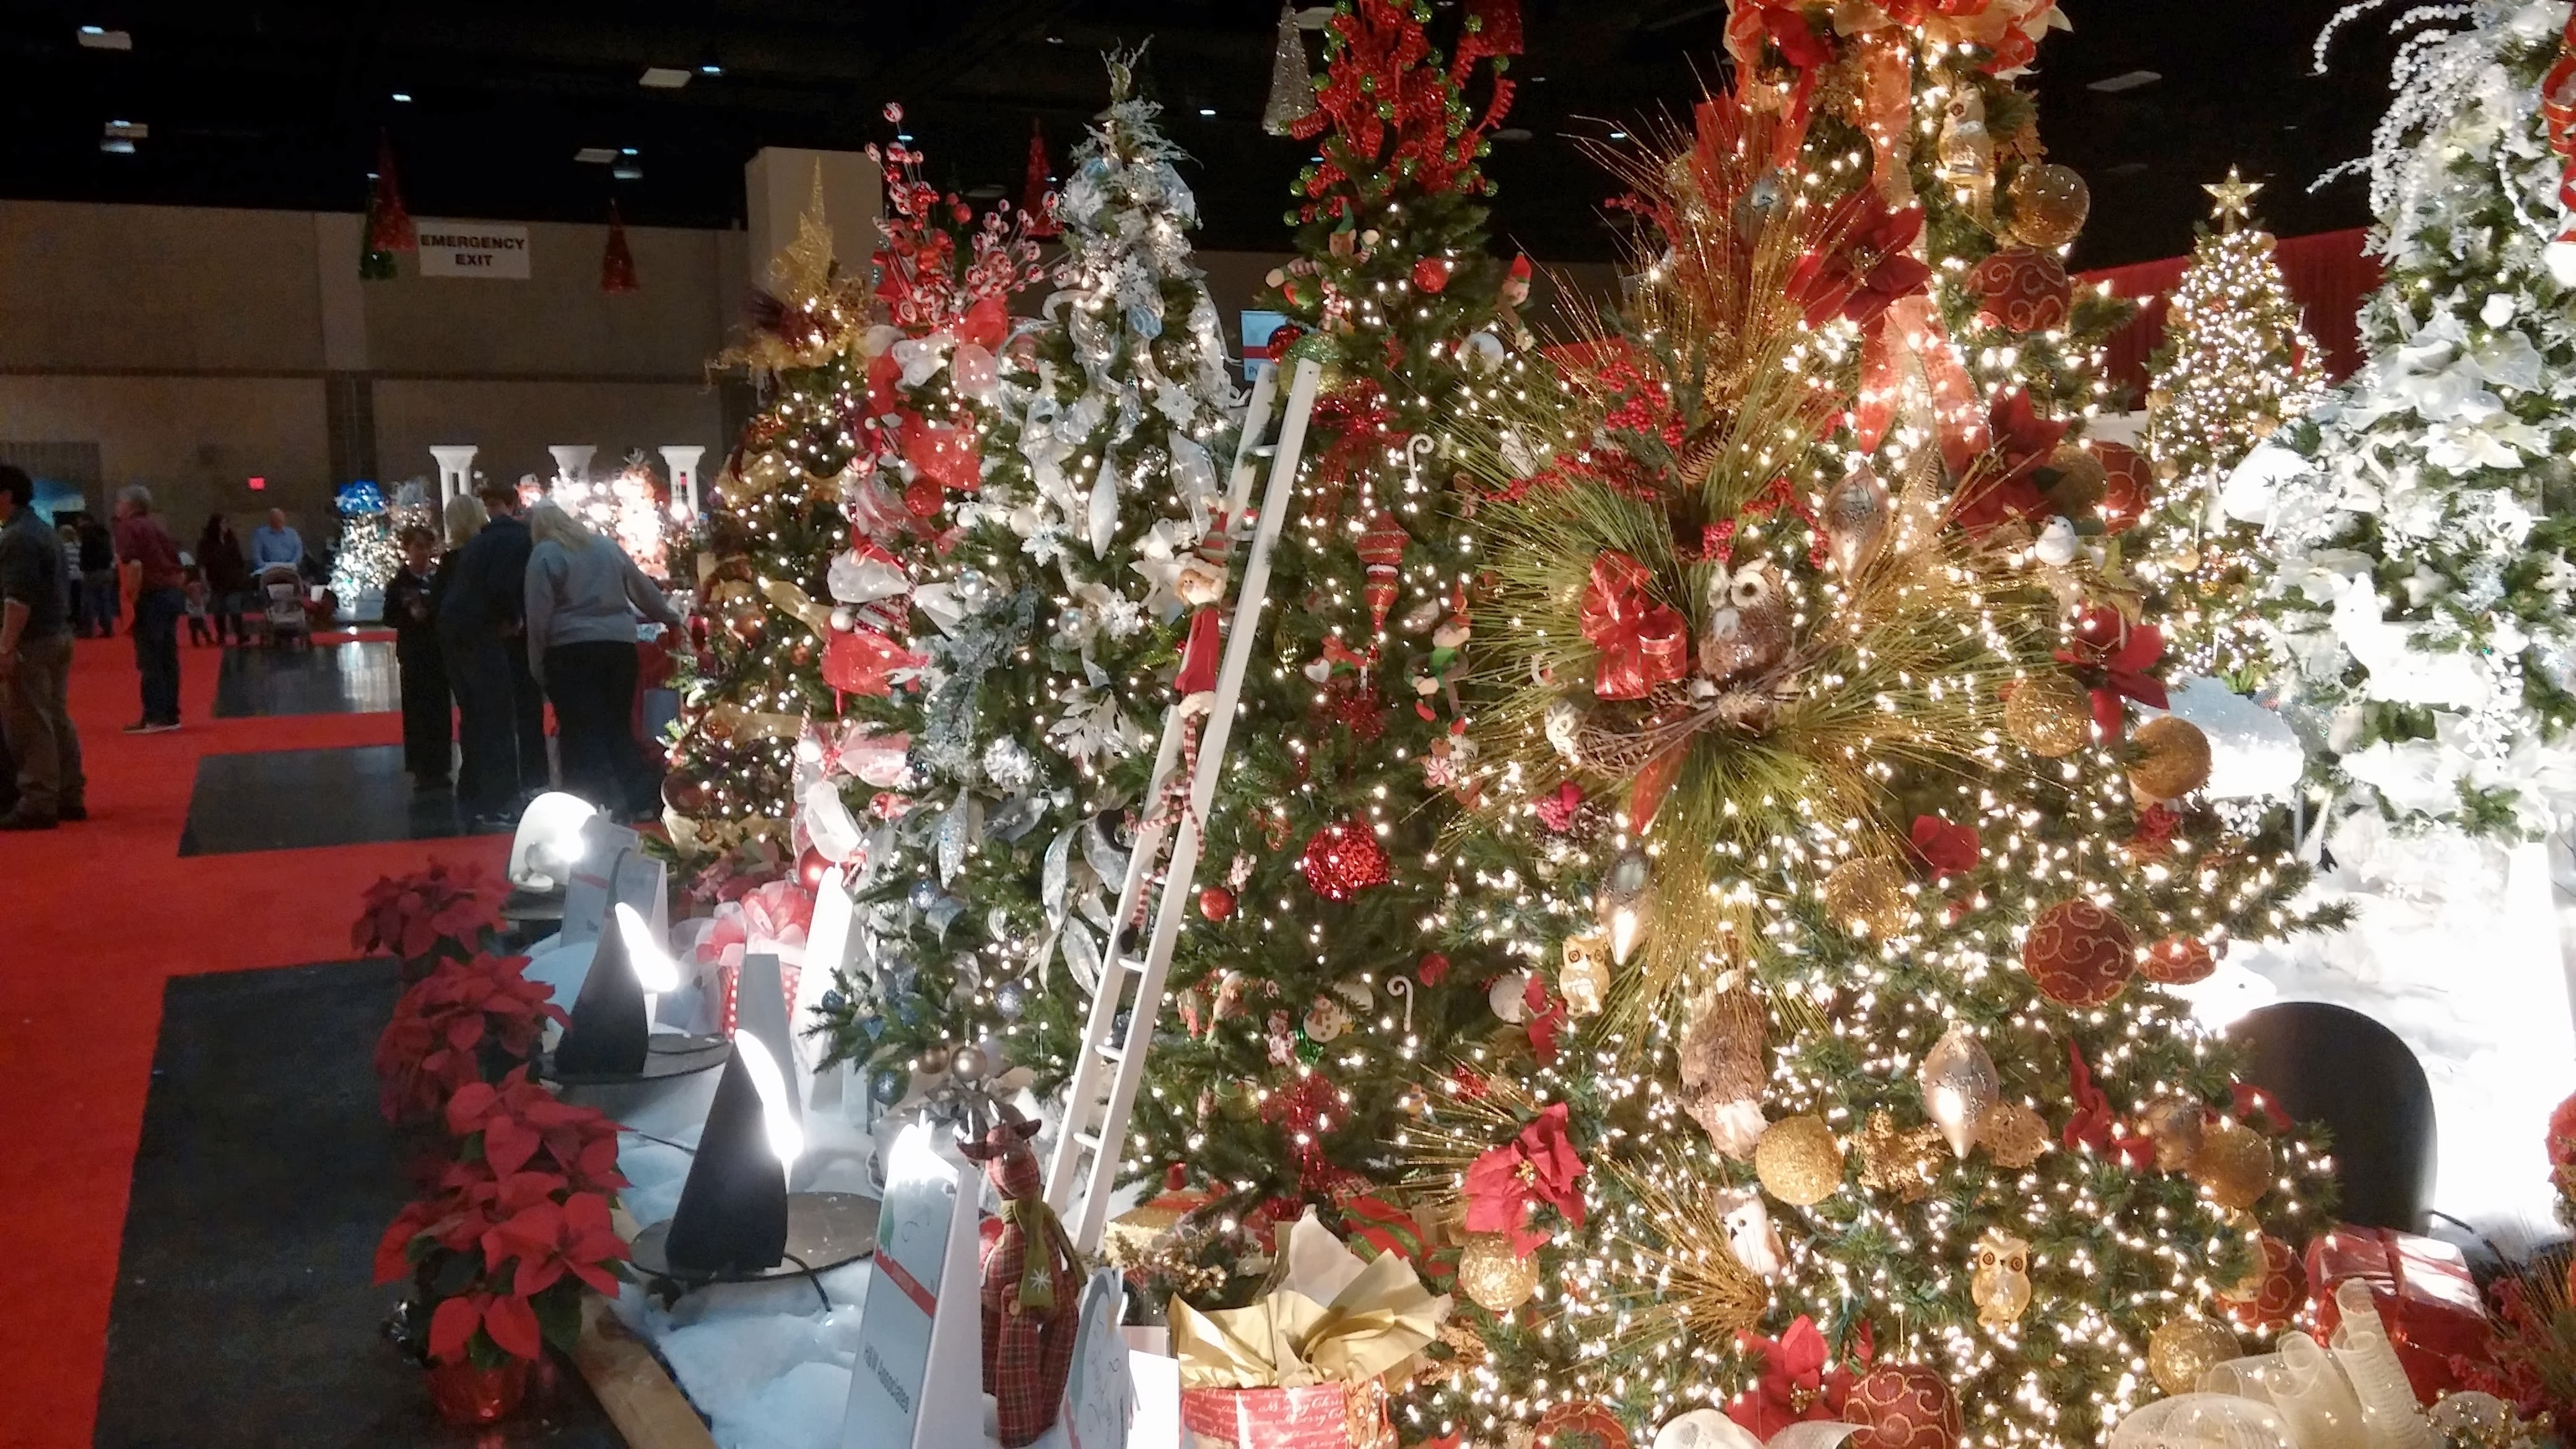 christmas events in knoxville tn 2020 Fantasy Of Trees christmas events in knoxville tn 2020